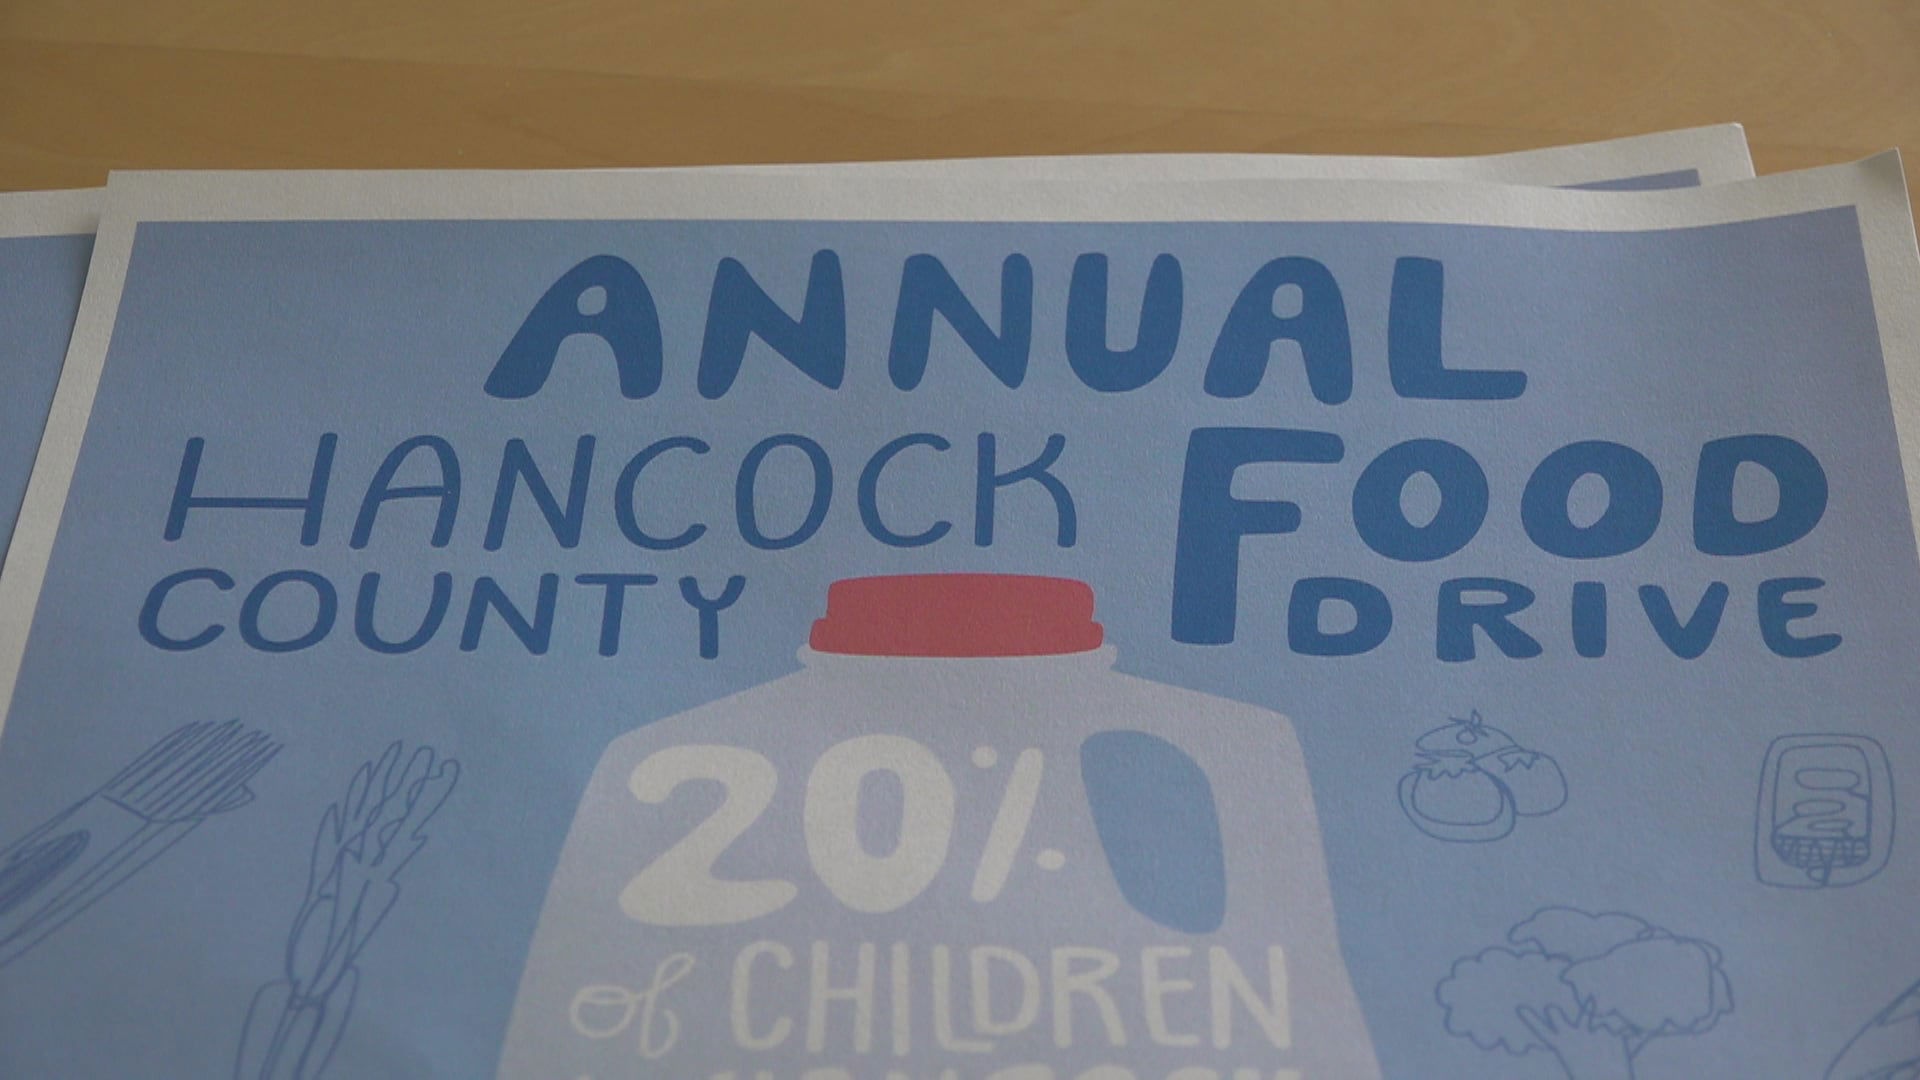 13th Annual Hancock County Food Drive offers fundraising events all month